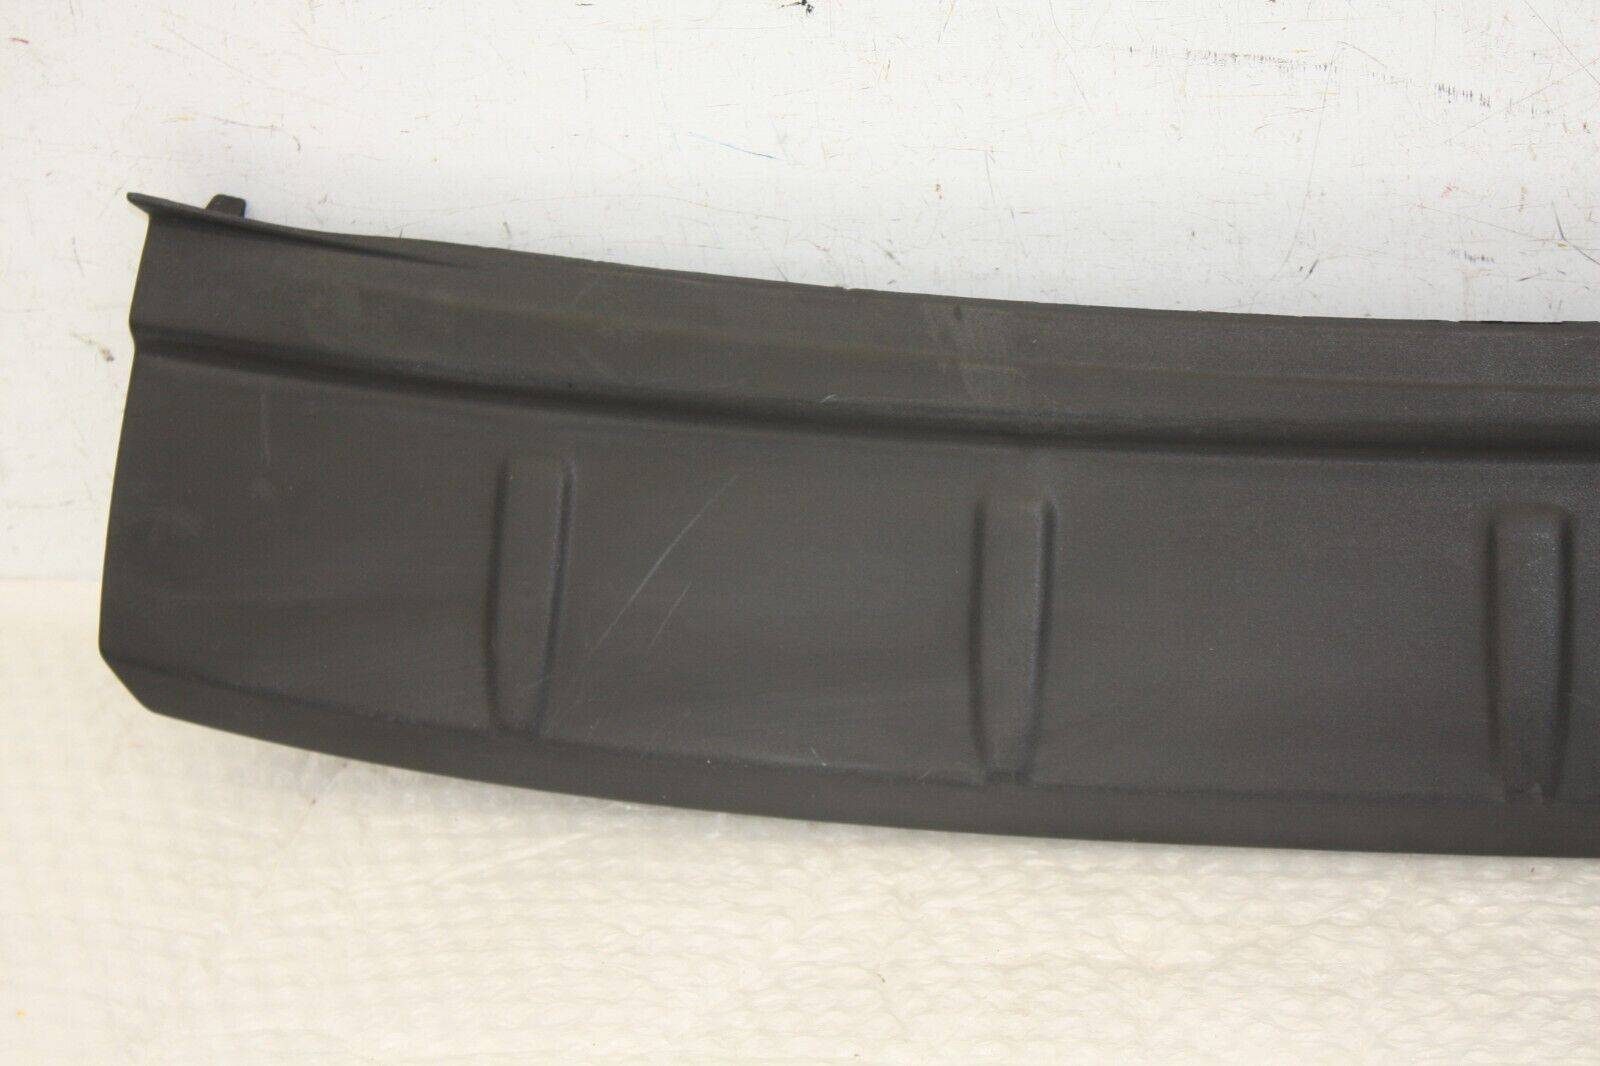 Volvo-XC60-Rear-Bumper-Protection-Cover-30764525-Genuine-FIXING-DAMAGED-176362657810-5